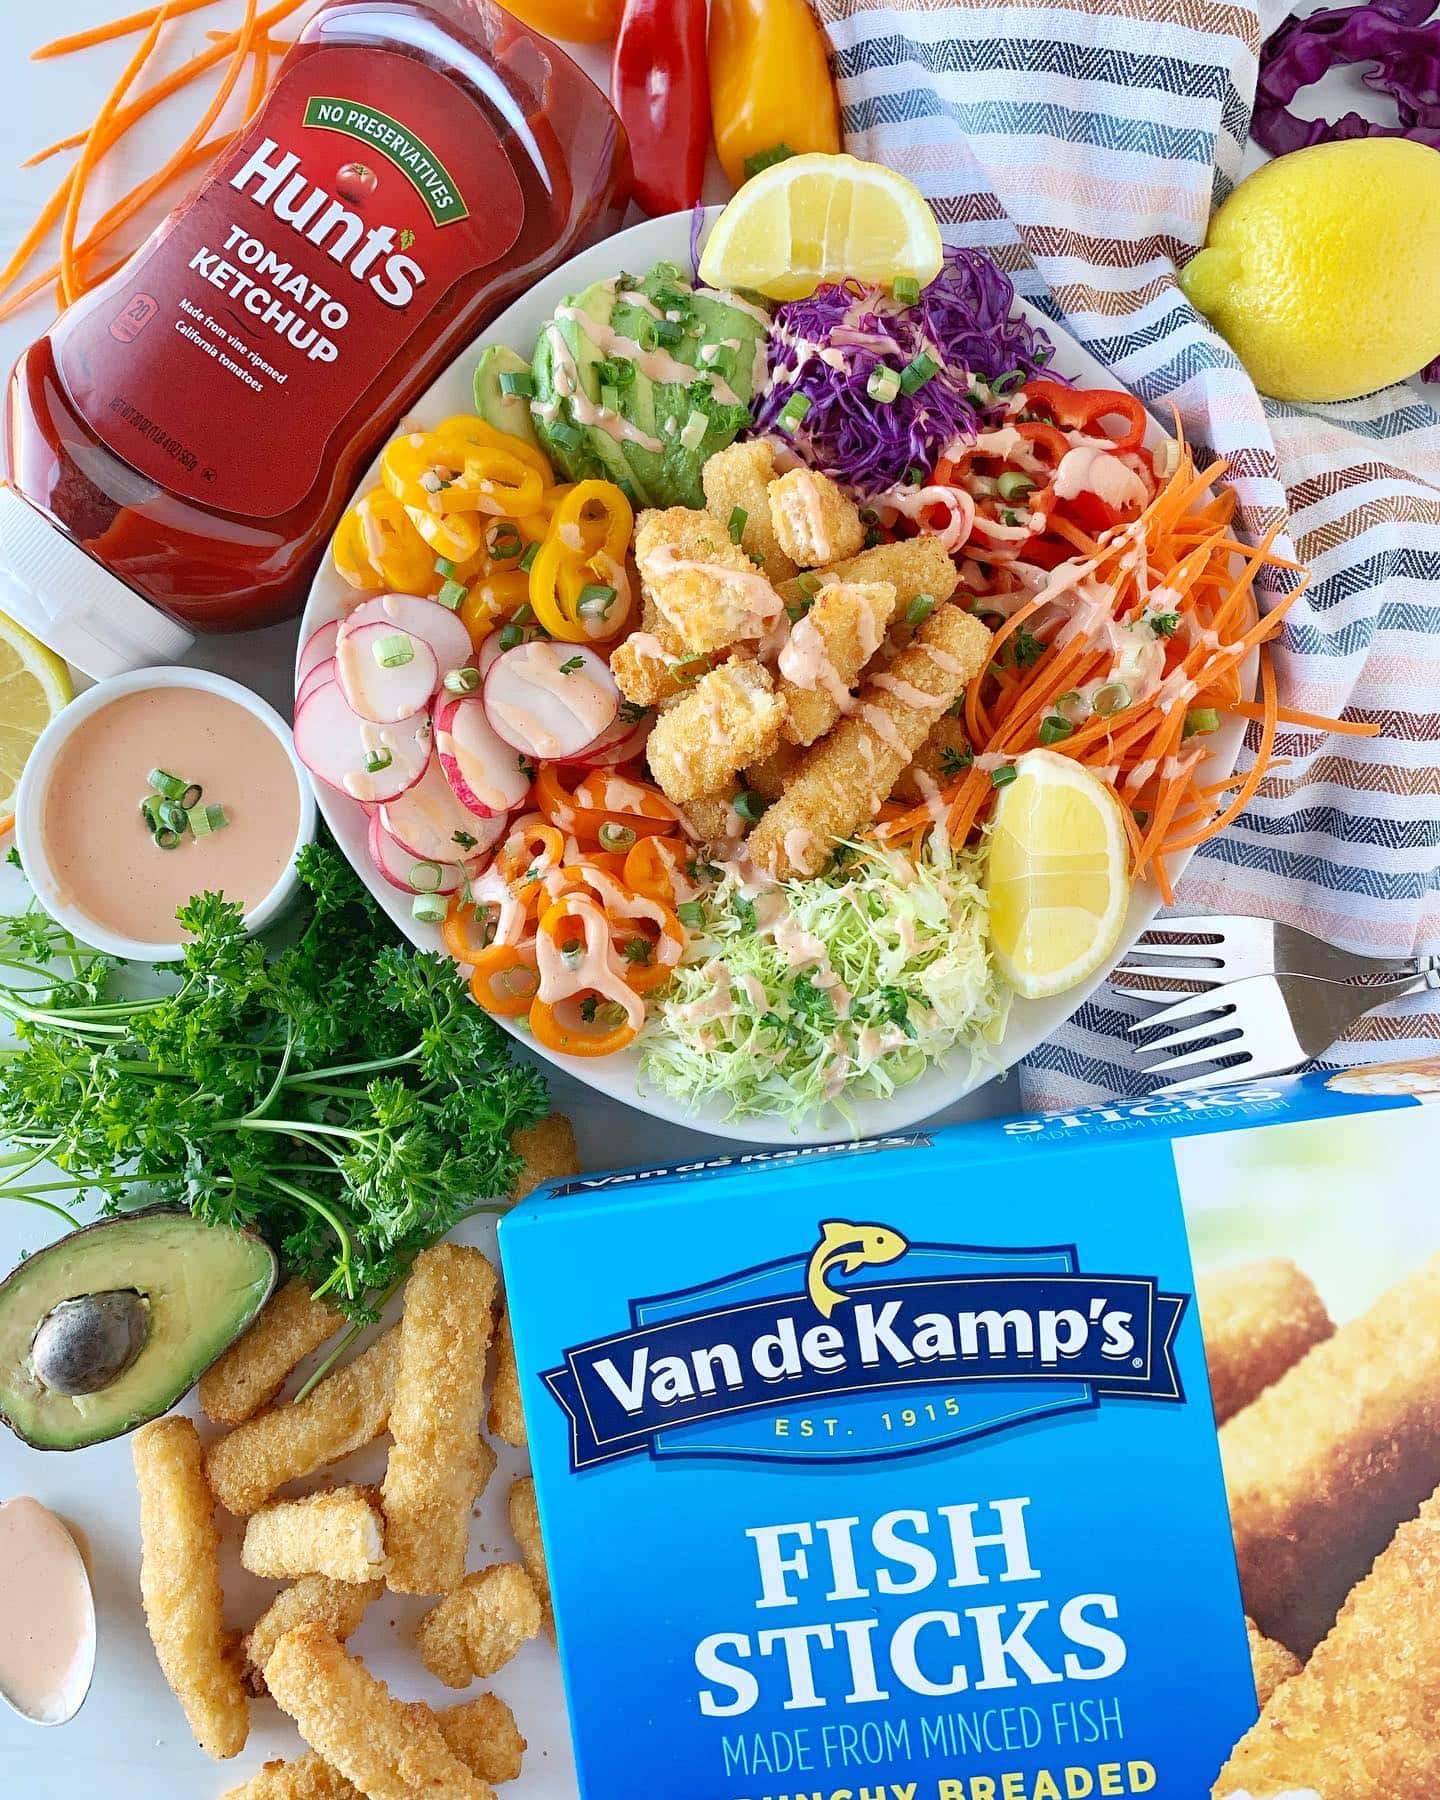 AD | Ohhhh my, do I have a recipe for you! It’s fishtastic.🐟🤩

Lent is here and Van de Kamp’s® Crunchy Breaded Fish Sticks is the answer. They are made from wild-caught Alaskan Pollock and contain 10g of protein/serving. …I usually cook up 2 servings. They are just.that.delish.🤤

And who says fish sticks are for kids? Not me! It’s a family affair here, you’re never too young or old for them. 

Every ingredient for this pretty Fish Stick Bowl can be found @walmart. I use their app to order groceries every week. Soooo convenient!

◻️Ingredients◻️
▫️Van de Kamp’s® Crunchy Breaded Fish Sticks
▫️Shredded carrots
▫️Sliced radish
▫️Purple and green cabbage, sliced thinly 
▫️Green onion, 
▫️Avocados, sliced 
▫️Mini bell peppers, sliced and deseeded
▫️Lemon wedge, optional but I love to spritz over the salad 
▫️Parsley sprinkled about 

◻️Yum Yum Sauce Ingredients◻️
▫️1/4 cup Mayo
▫️1 Tbsp + 1 tsp Hunt's Ketchup
▫️1/4 tsp sugar
▫️1/8 tsp paprika 
▫️1/8 tsp garlic 
▫️1/32 tsp cayenne (basically a little itty bitty bit! Lol)
▫️2 tsp water 
Mix all ingredients together in small bowl. Makes enough for 2 servings. 

I bake the fish sticks in my air fryer, but oven directions are on the box too! Place as many veggies as you like in a bowl and top with warm fish sticks. Drizzle Fish Stick Bowl with yum yum sauce and a squeeze of the lemon wedge.

Trust me, you are going to want to run NOT walk to grab these Fish Stick Bowl ingredients. Happy eating!

Order HERE: https://2cart.net/10640003 OR click link @happihomemade👈🏼